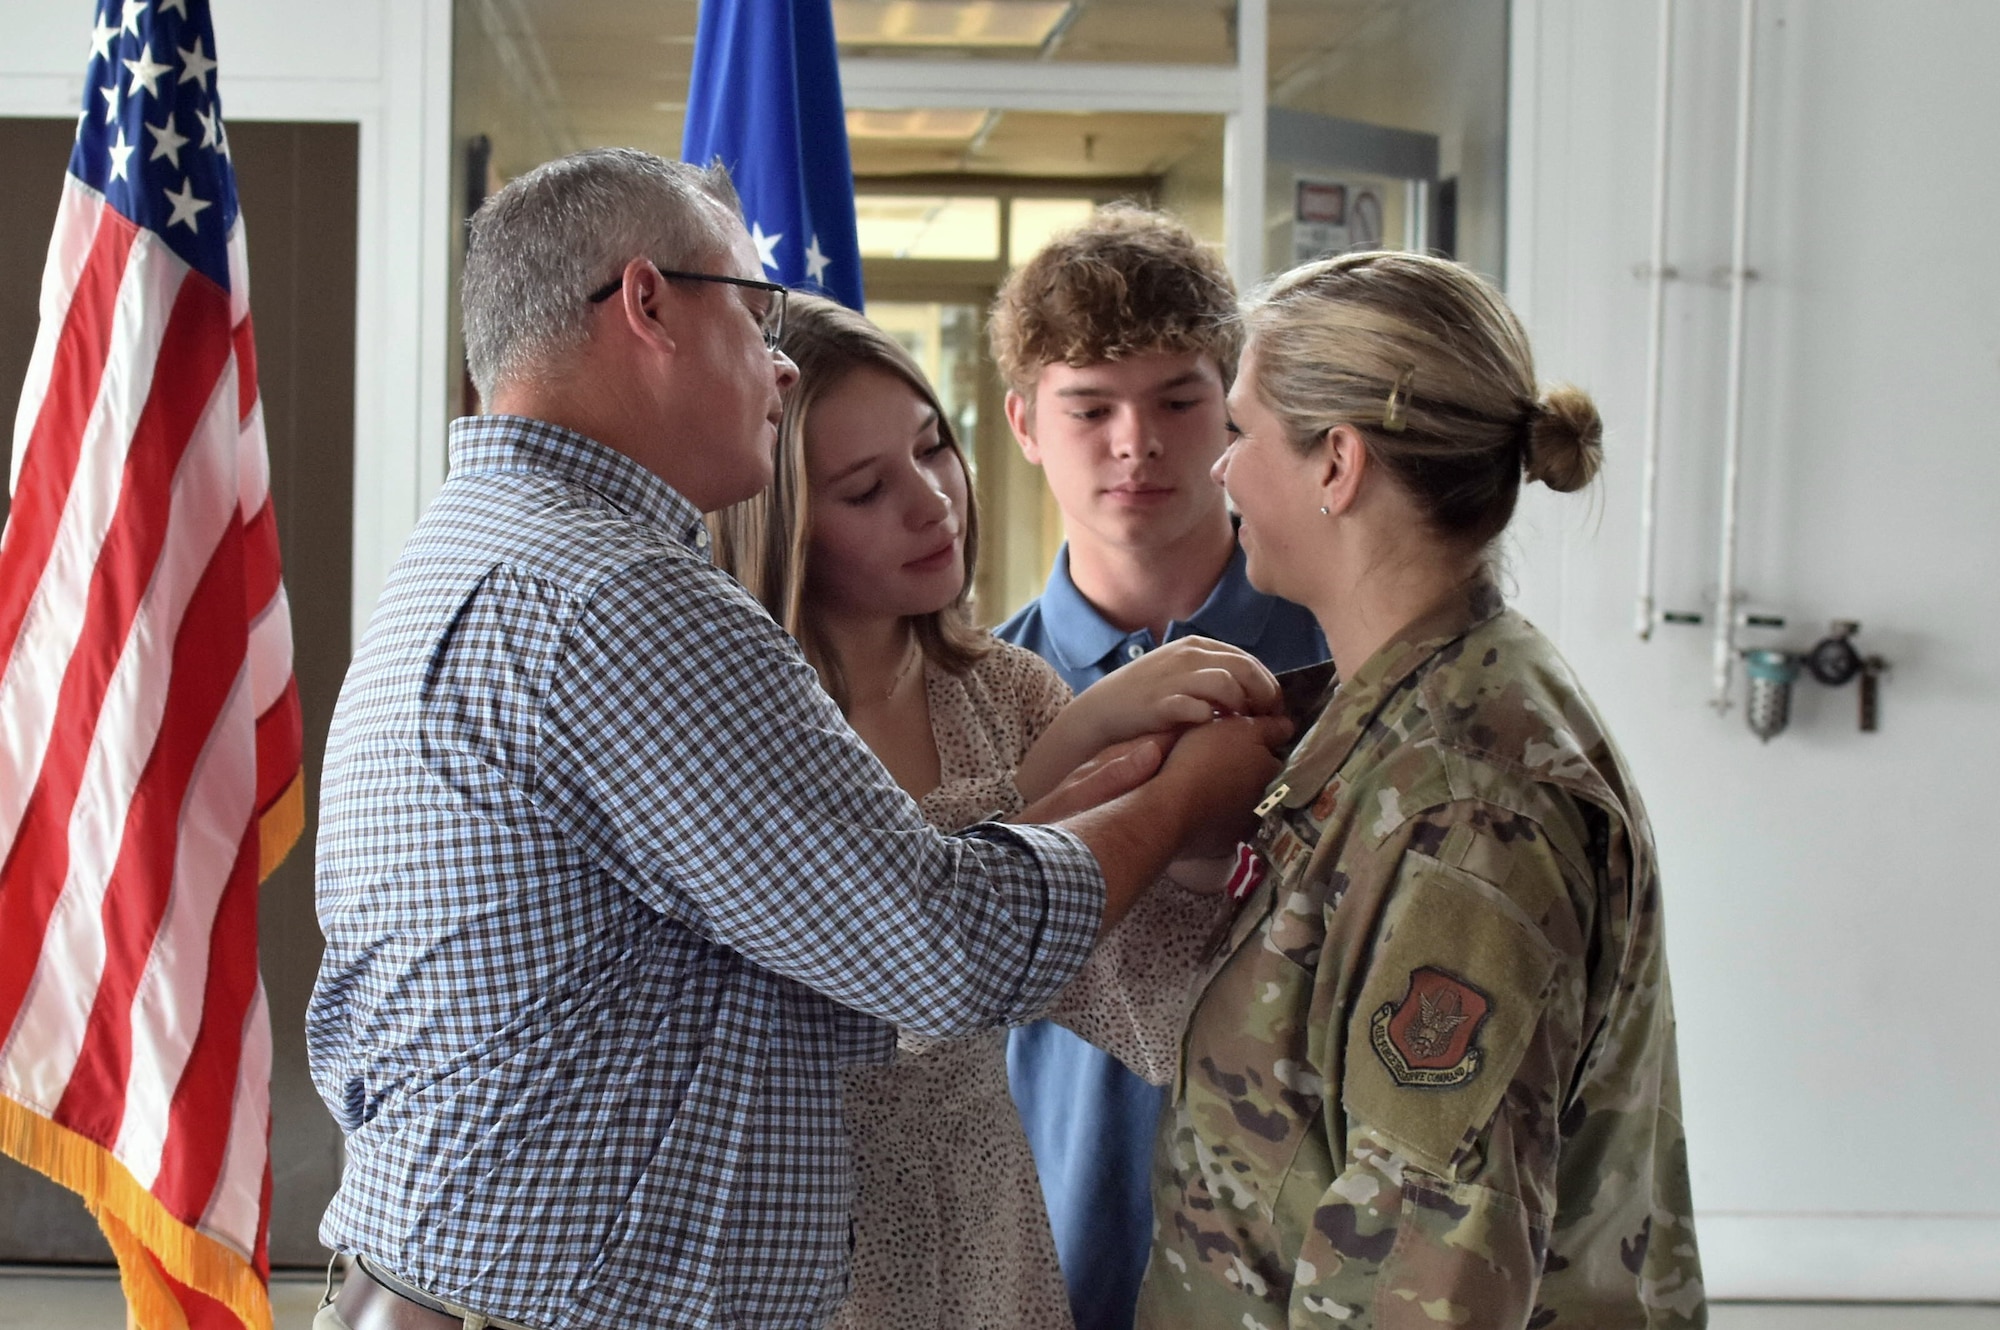 Chief Master Sgt. Angela Rooney’s, 301st Logistics Readiness Squadron senior enlisted leader, family places the retirement pin on Rooney’s uniform at Naval Air Station Joint Reserve Base Fort Worth, Texas on June 4, 2022. This retirement pin commemorates Rooney’s service in the U.S. Air Force. (U.S. Air Force photo by Staff Sgt. Randall Moose)